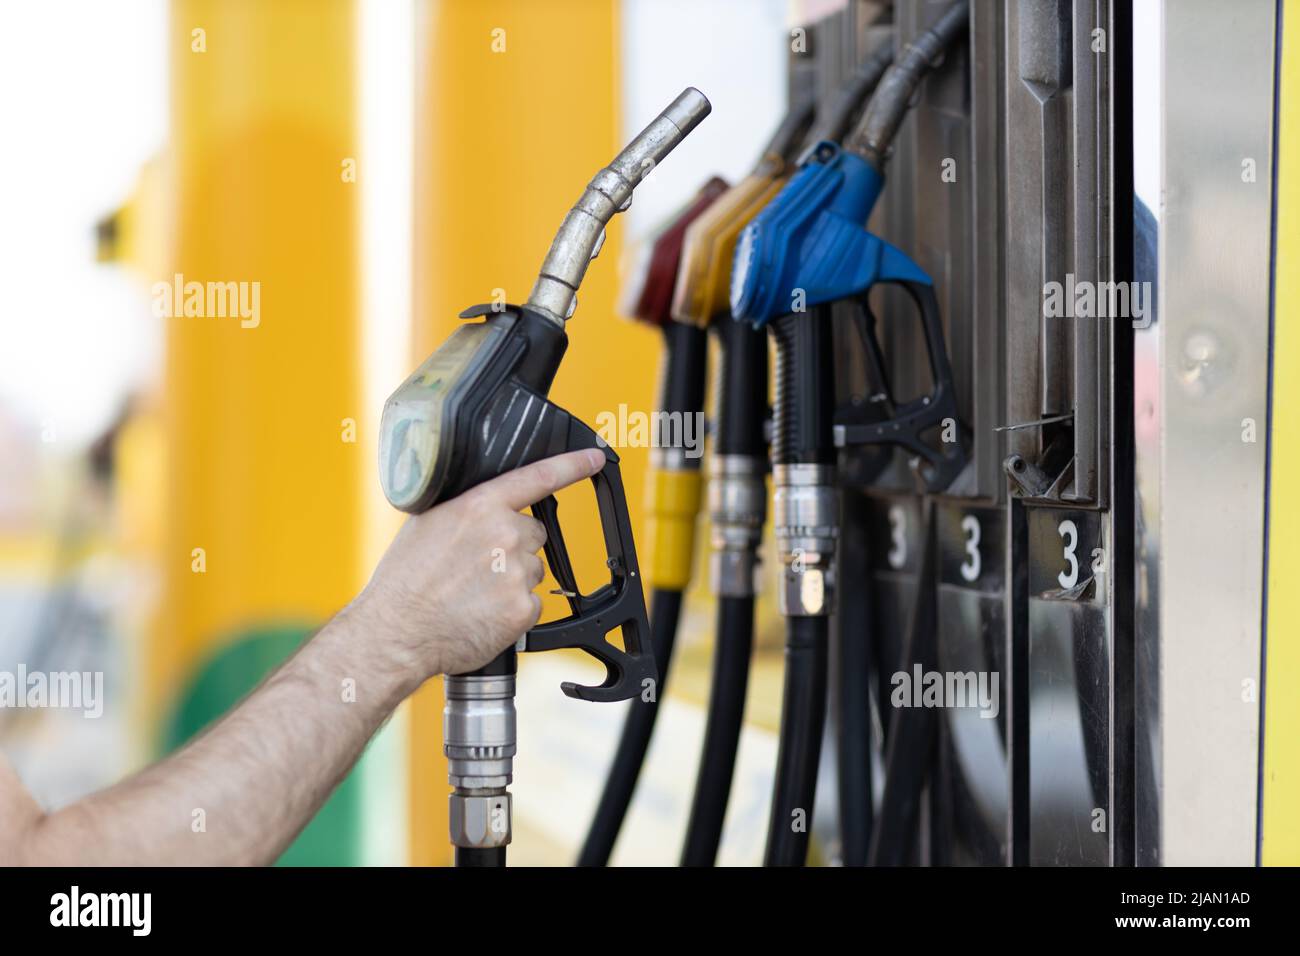 Man holding filling gun in his hand at gas station. Sanctions economy crisis concept Stock Photo